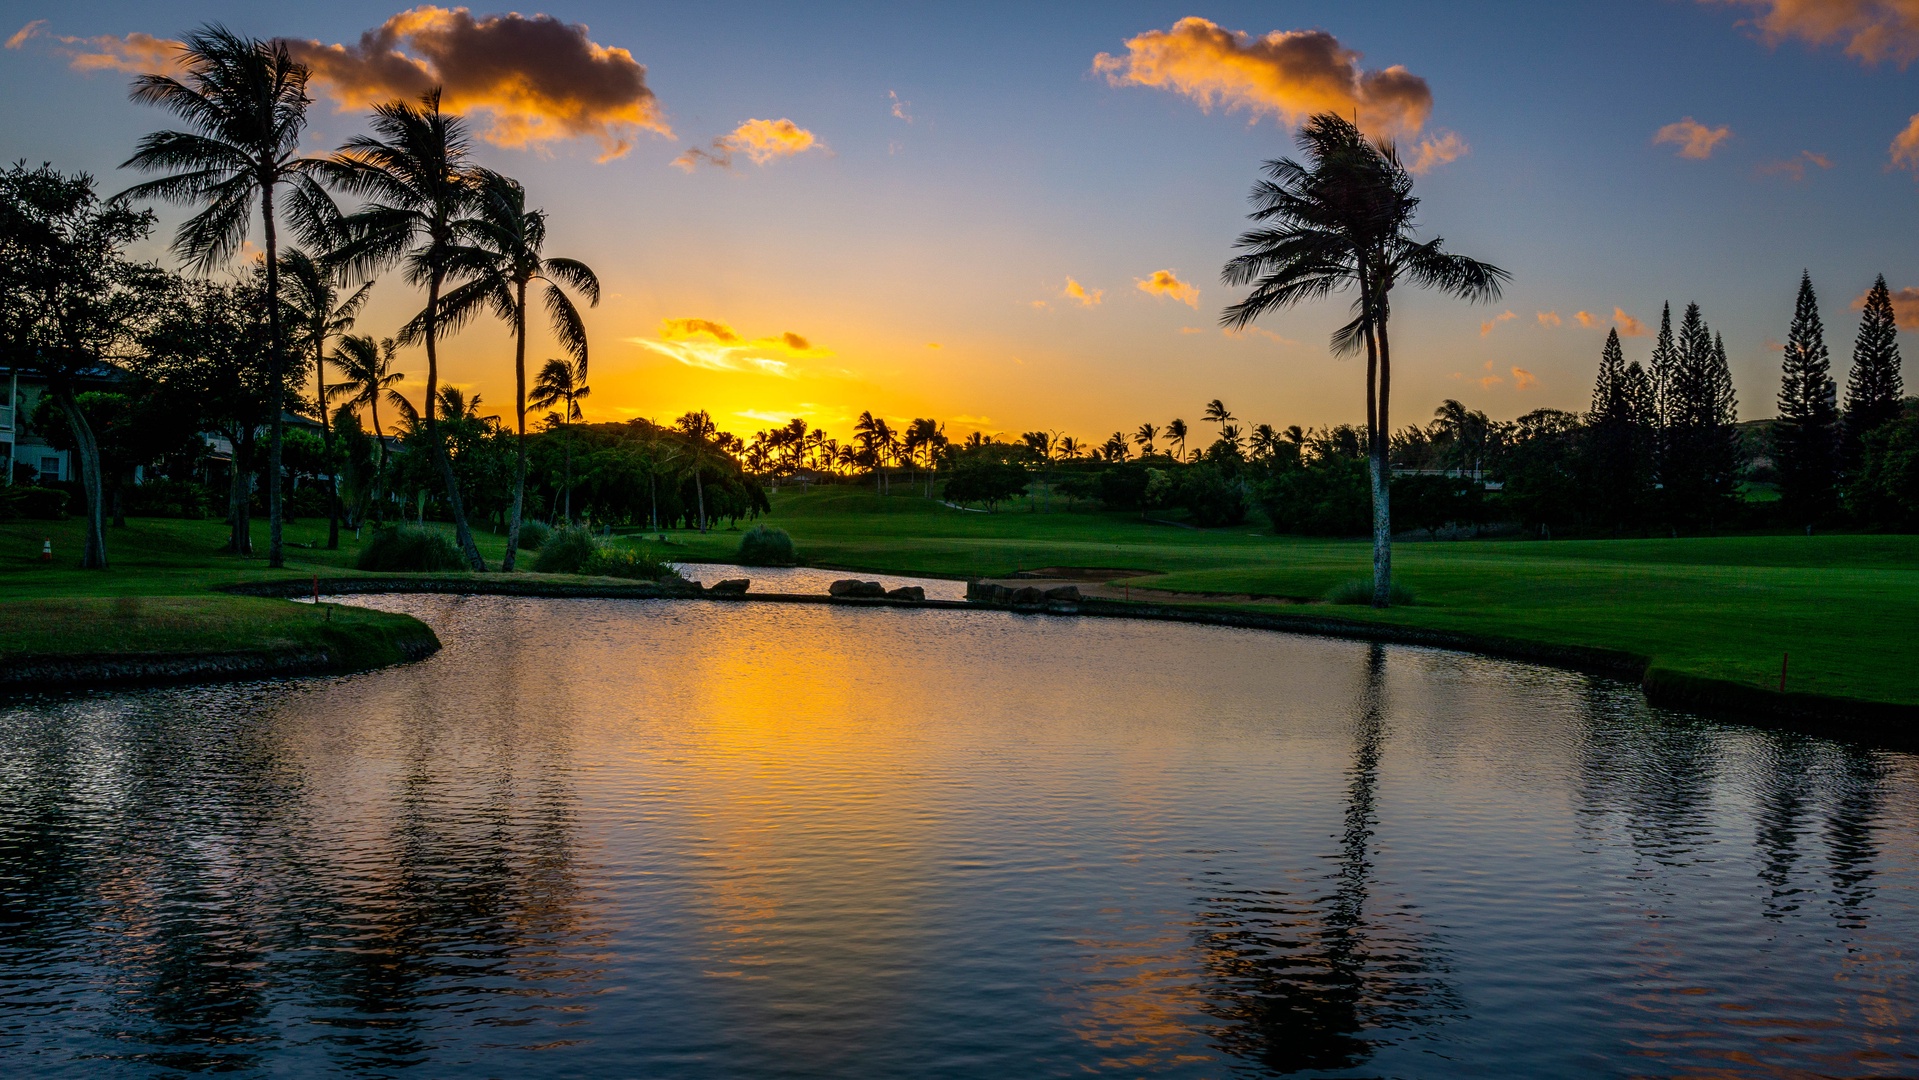 Kapolei Vacation Rentals, Coconut Plantation 1100-2 - One of the most beautiful golf courses you will ever see.